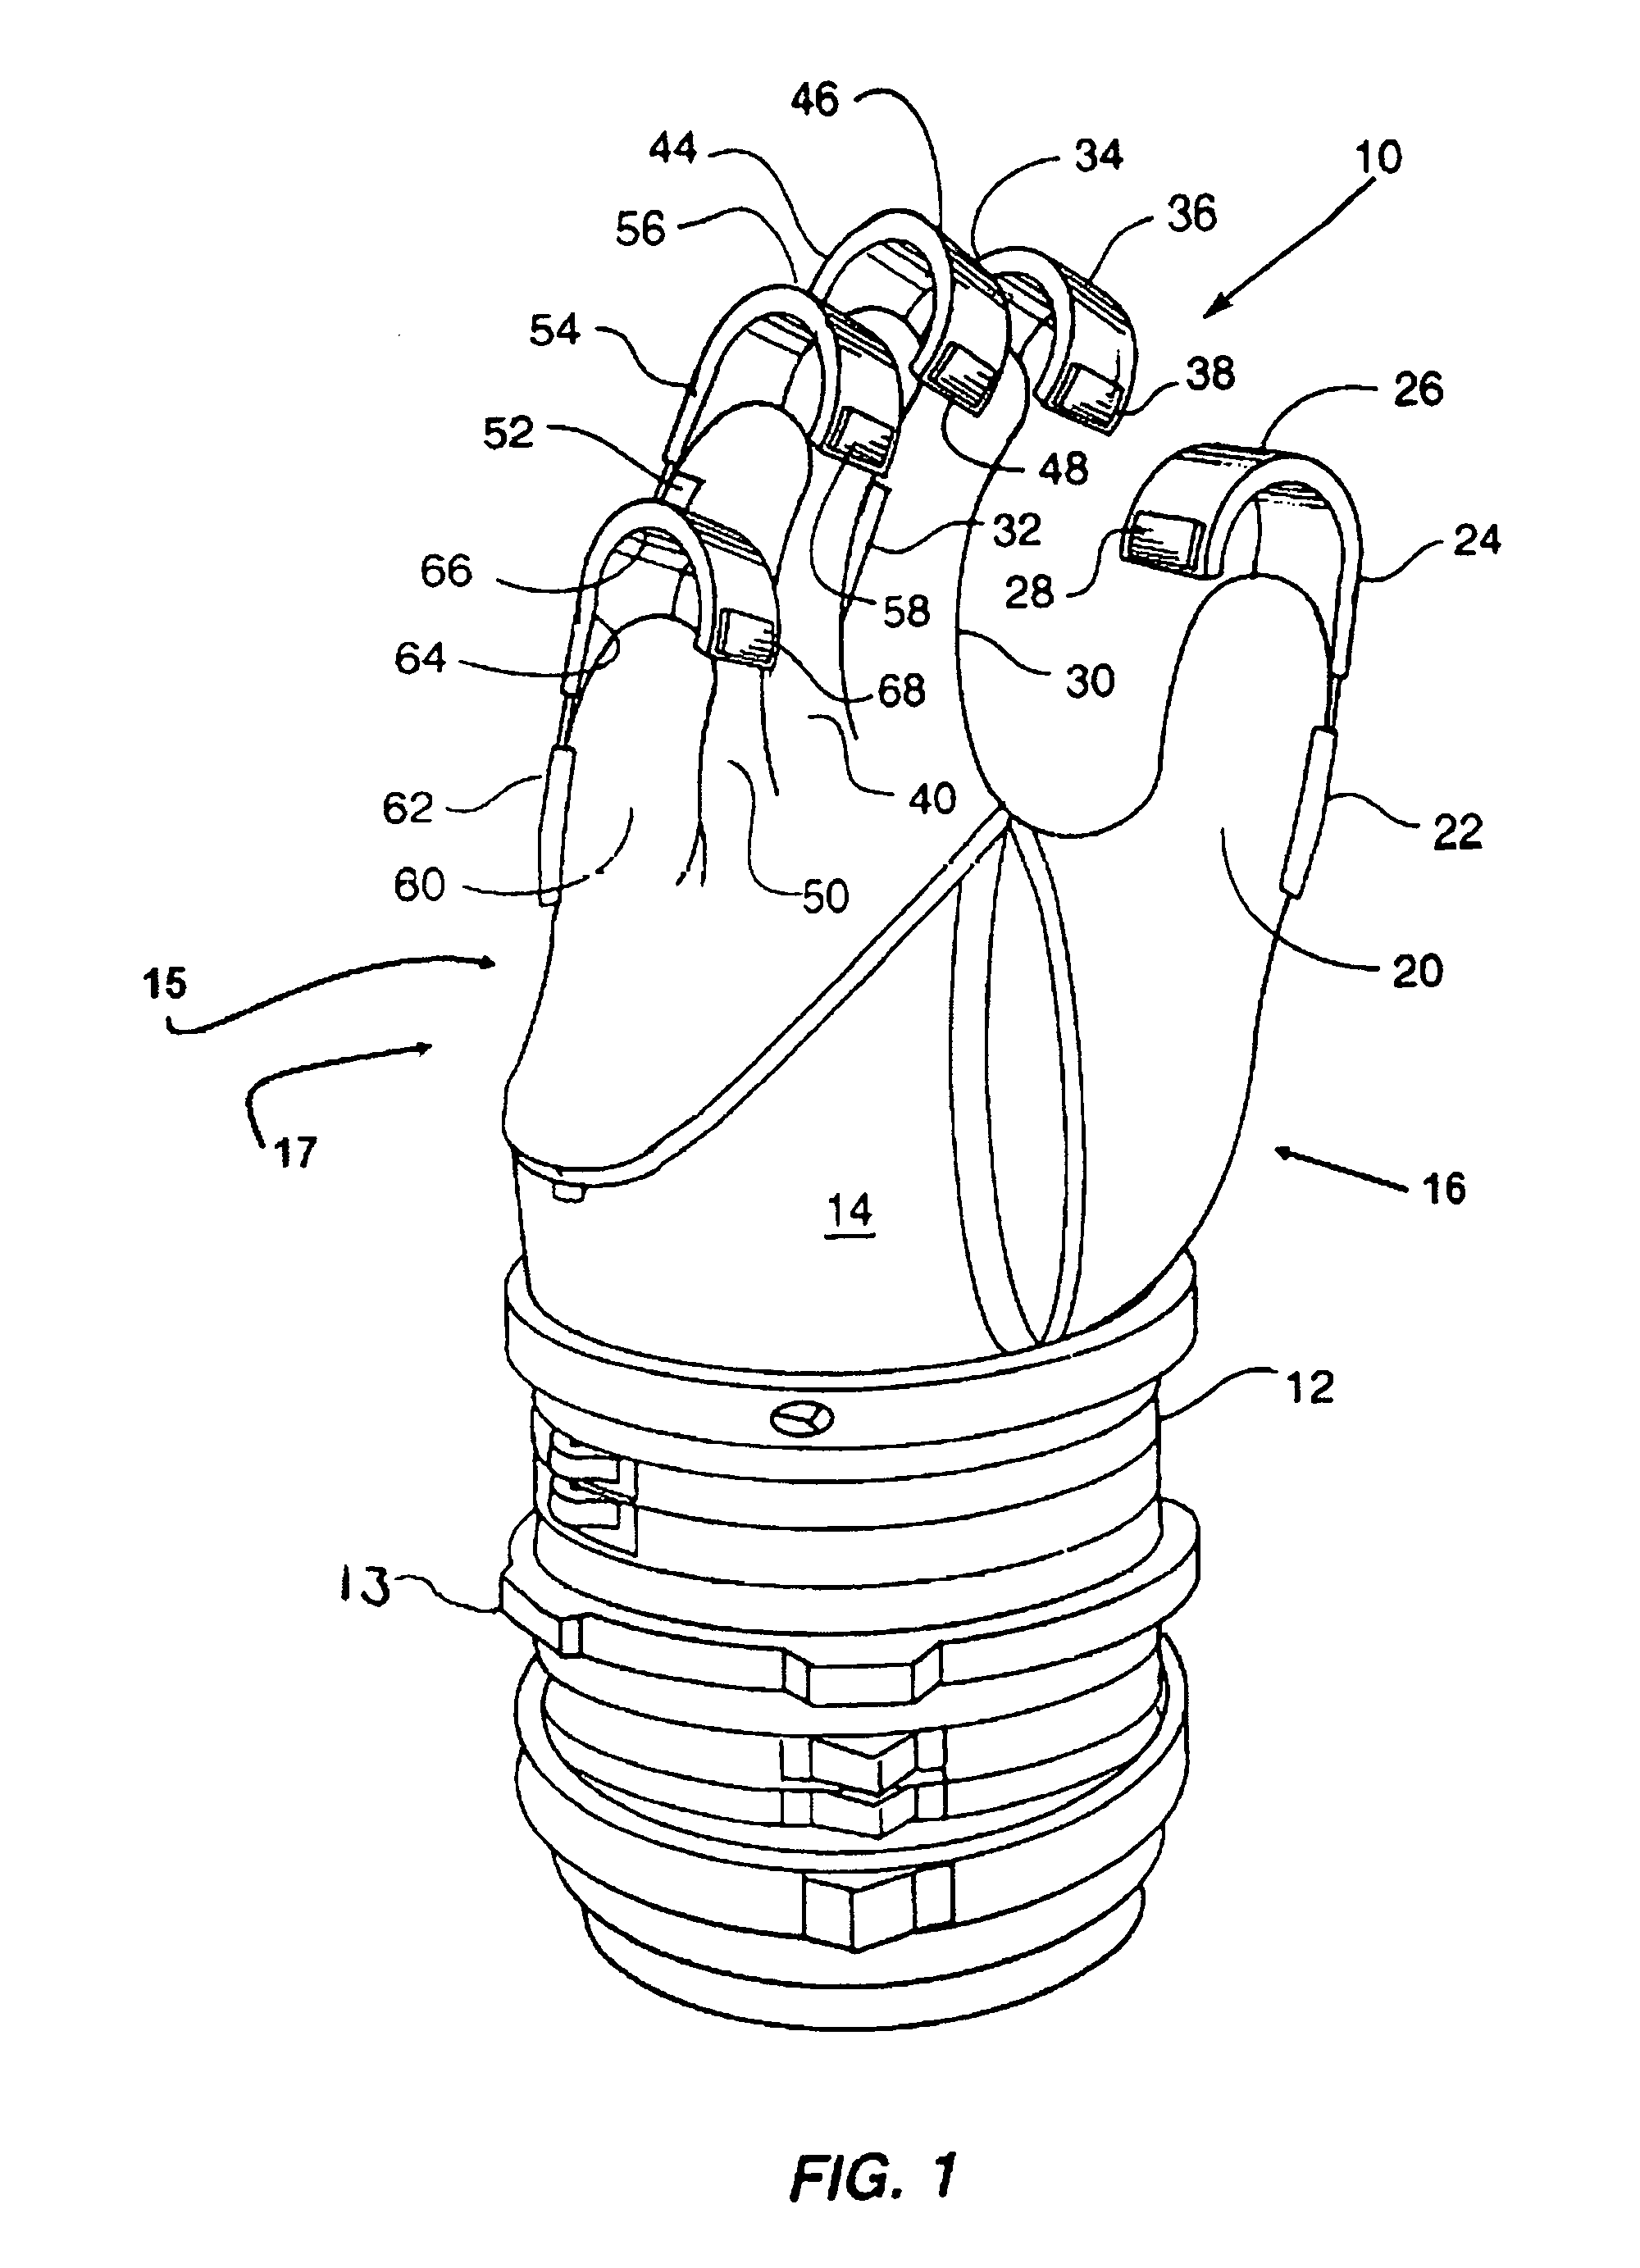 Astronaut gloves with finger extensions